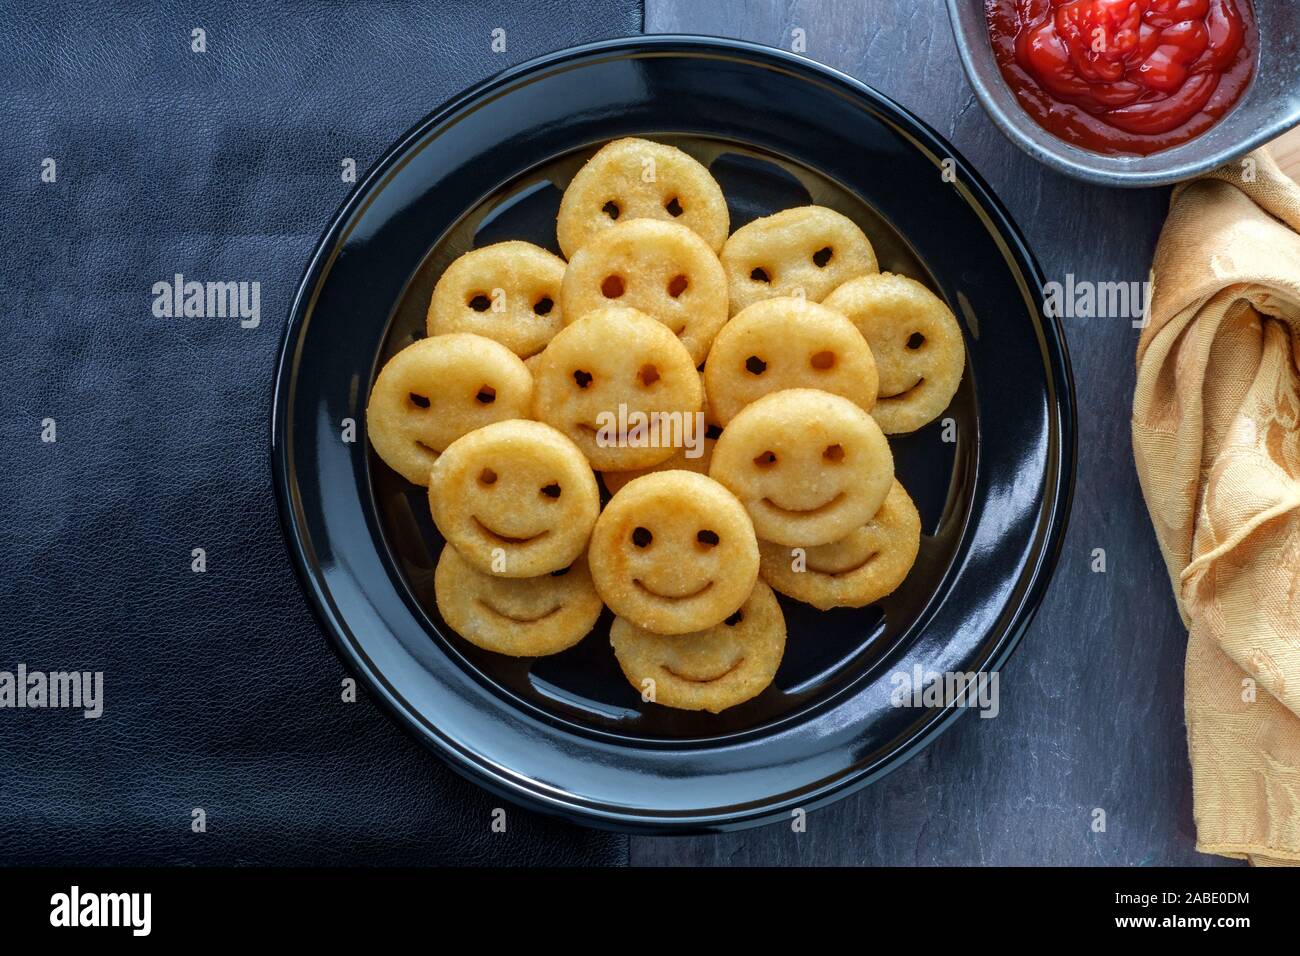 Happy French fried potato smiley faces with ketchup Stock Photo ...